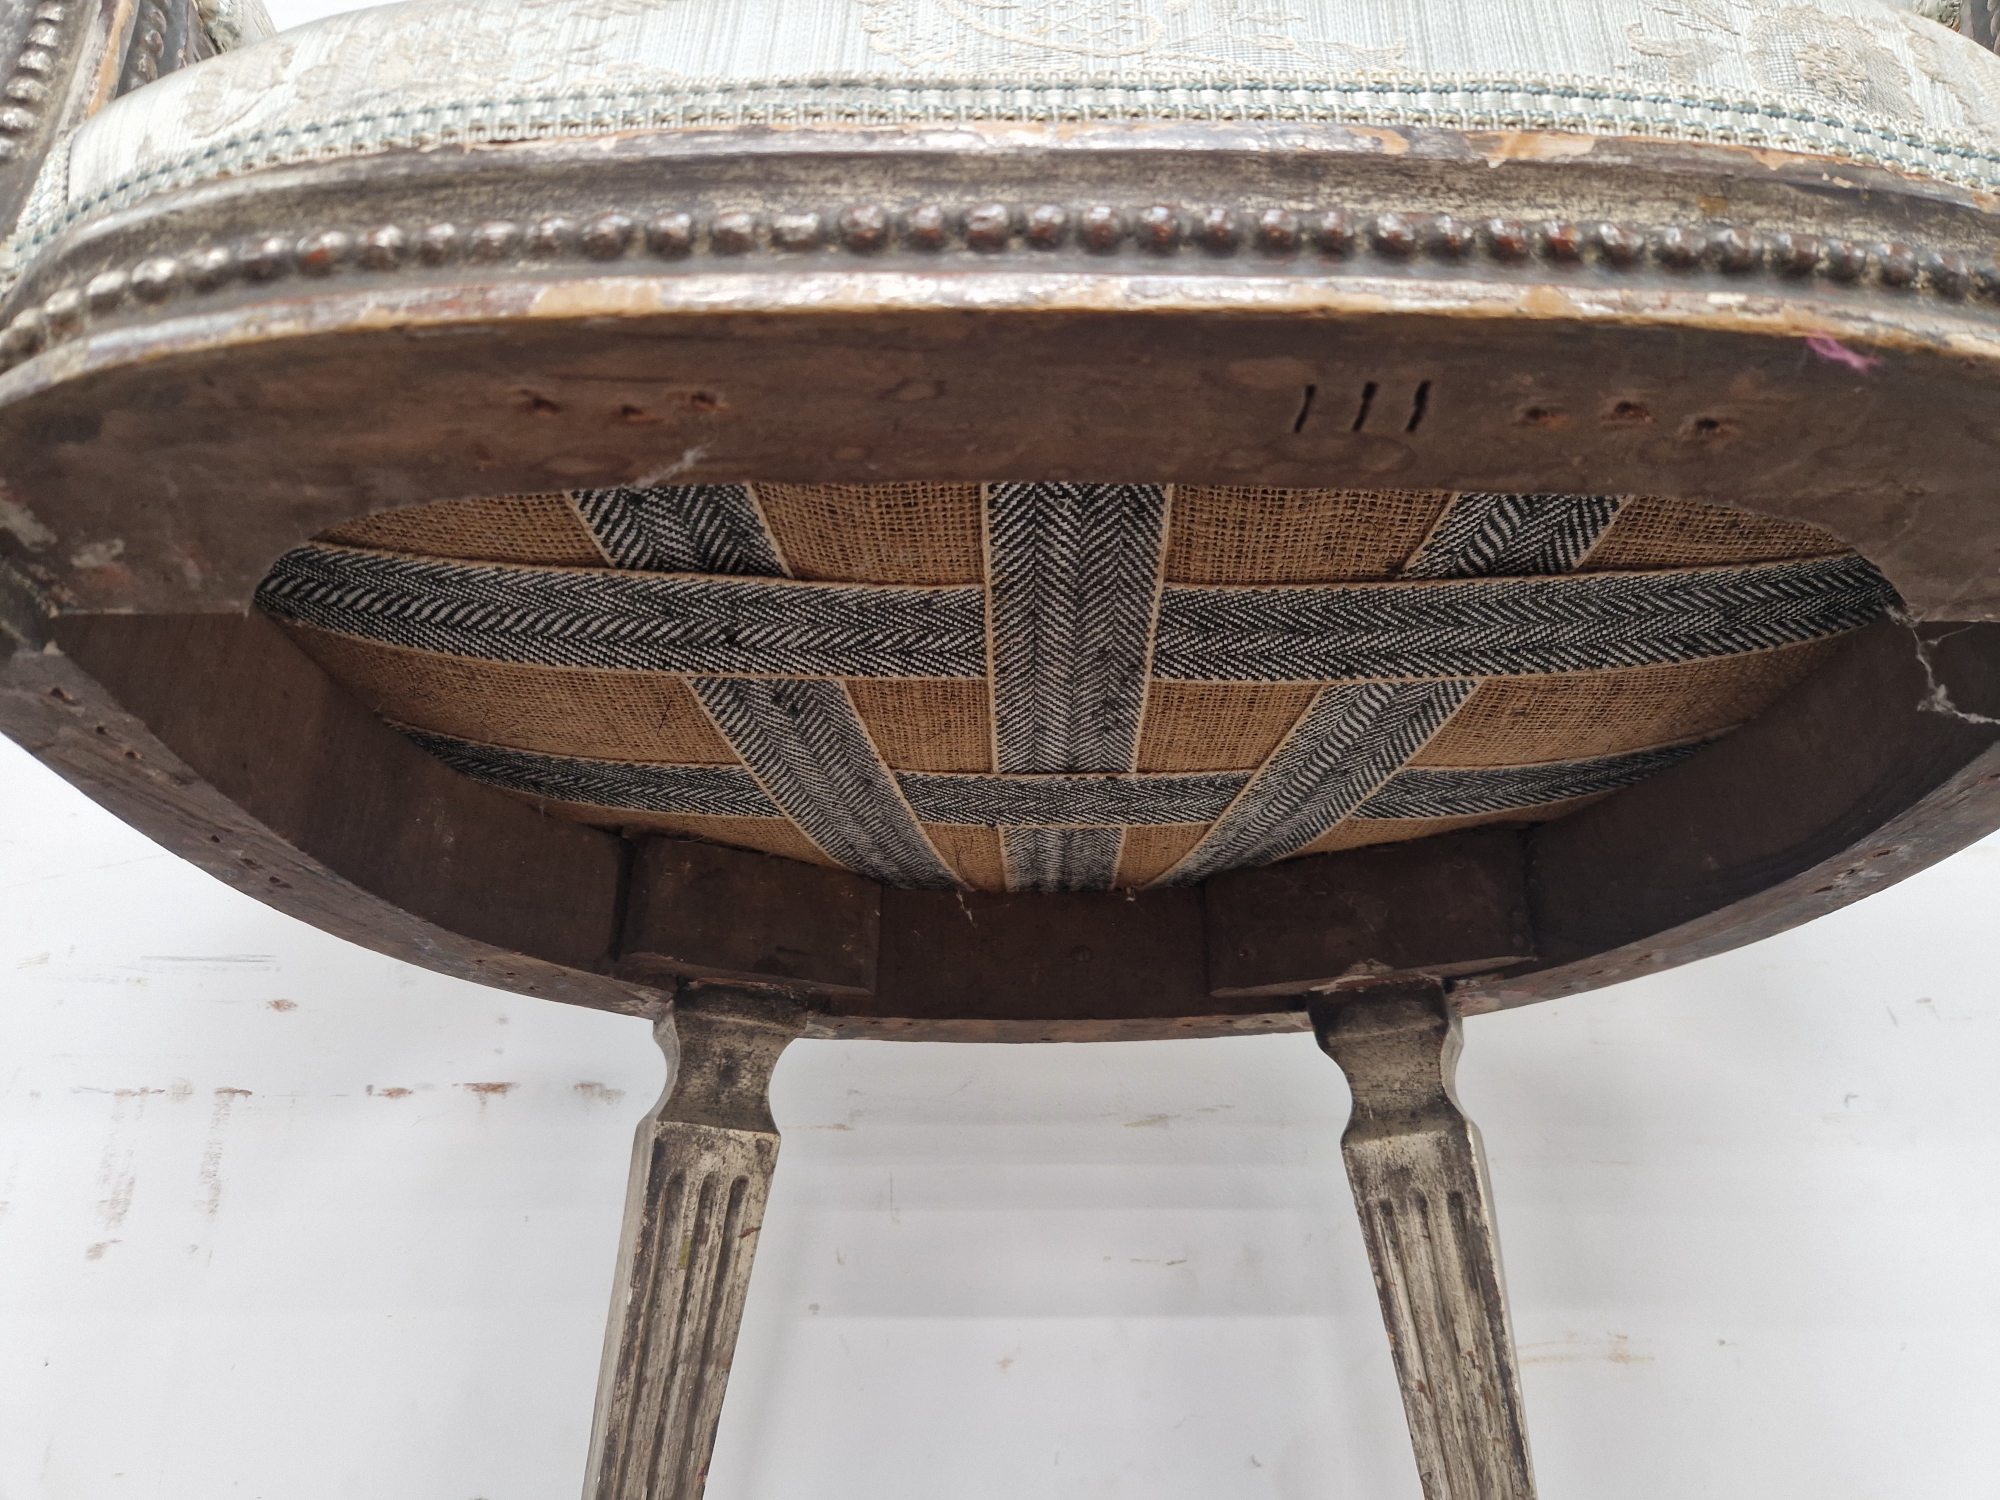 AN EARLY 19th C. SILVERED WOOD WINDOW SEAT, THE UPHOLSTERED ARMS AND SEAT ABOVE FLUTED SQUARE LEGS - Image 7 of 7